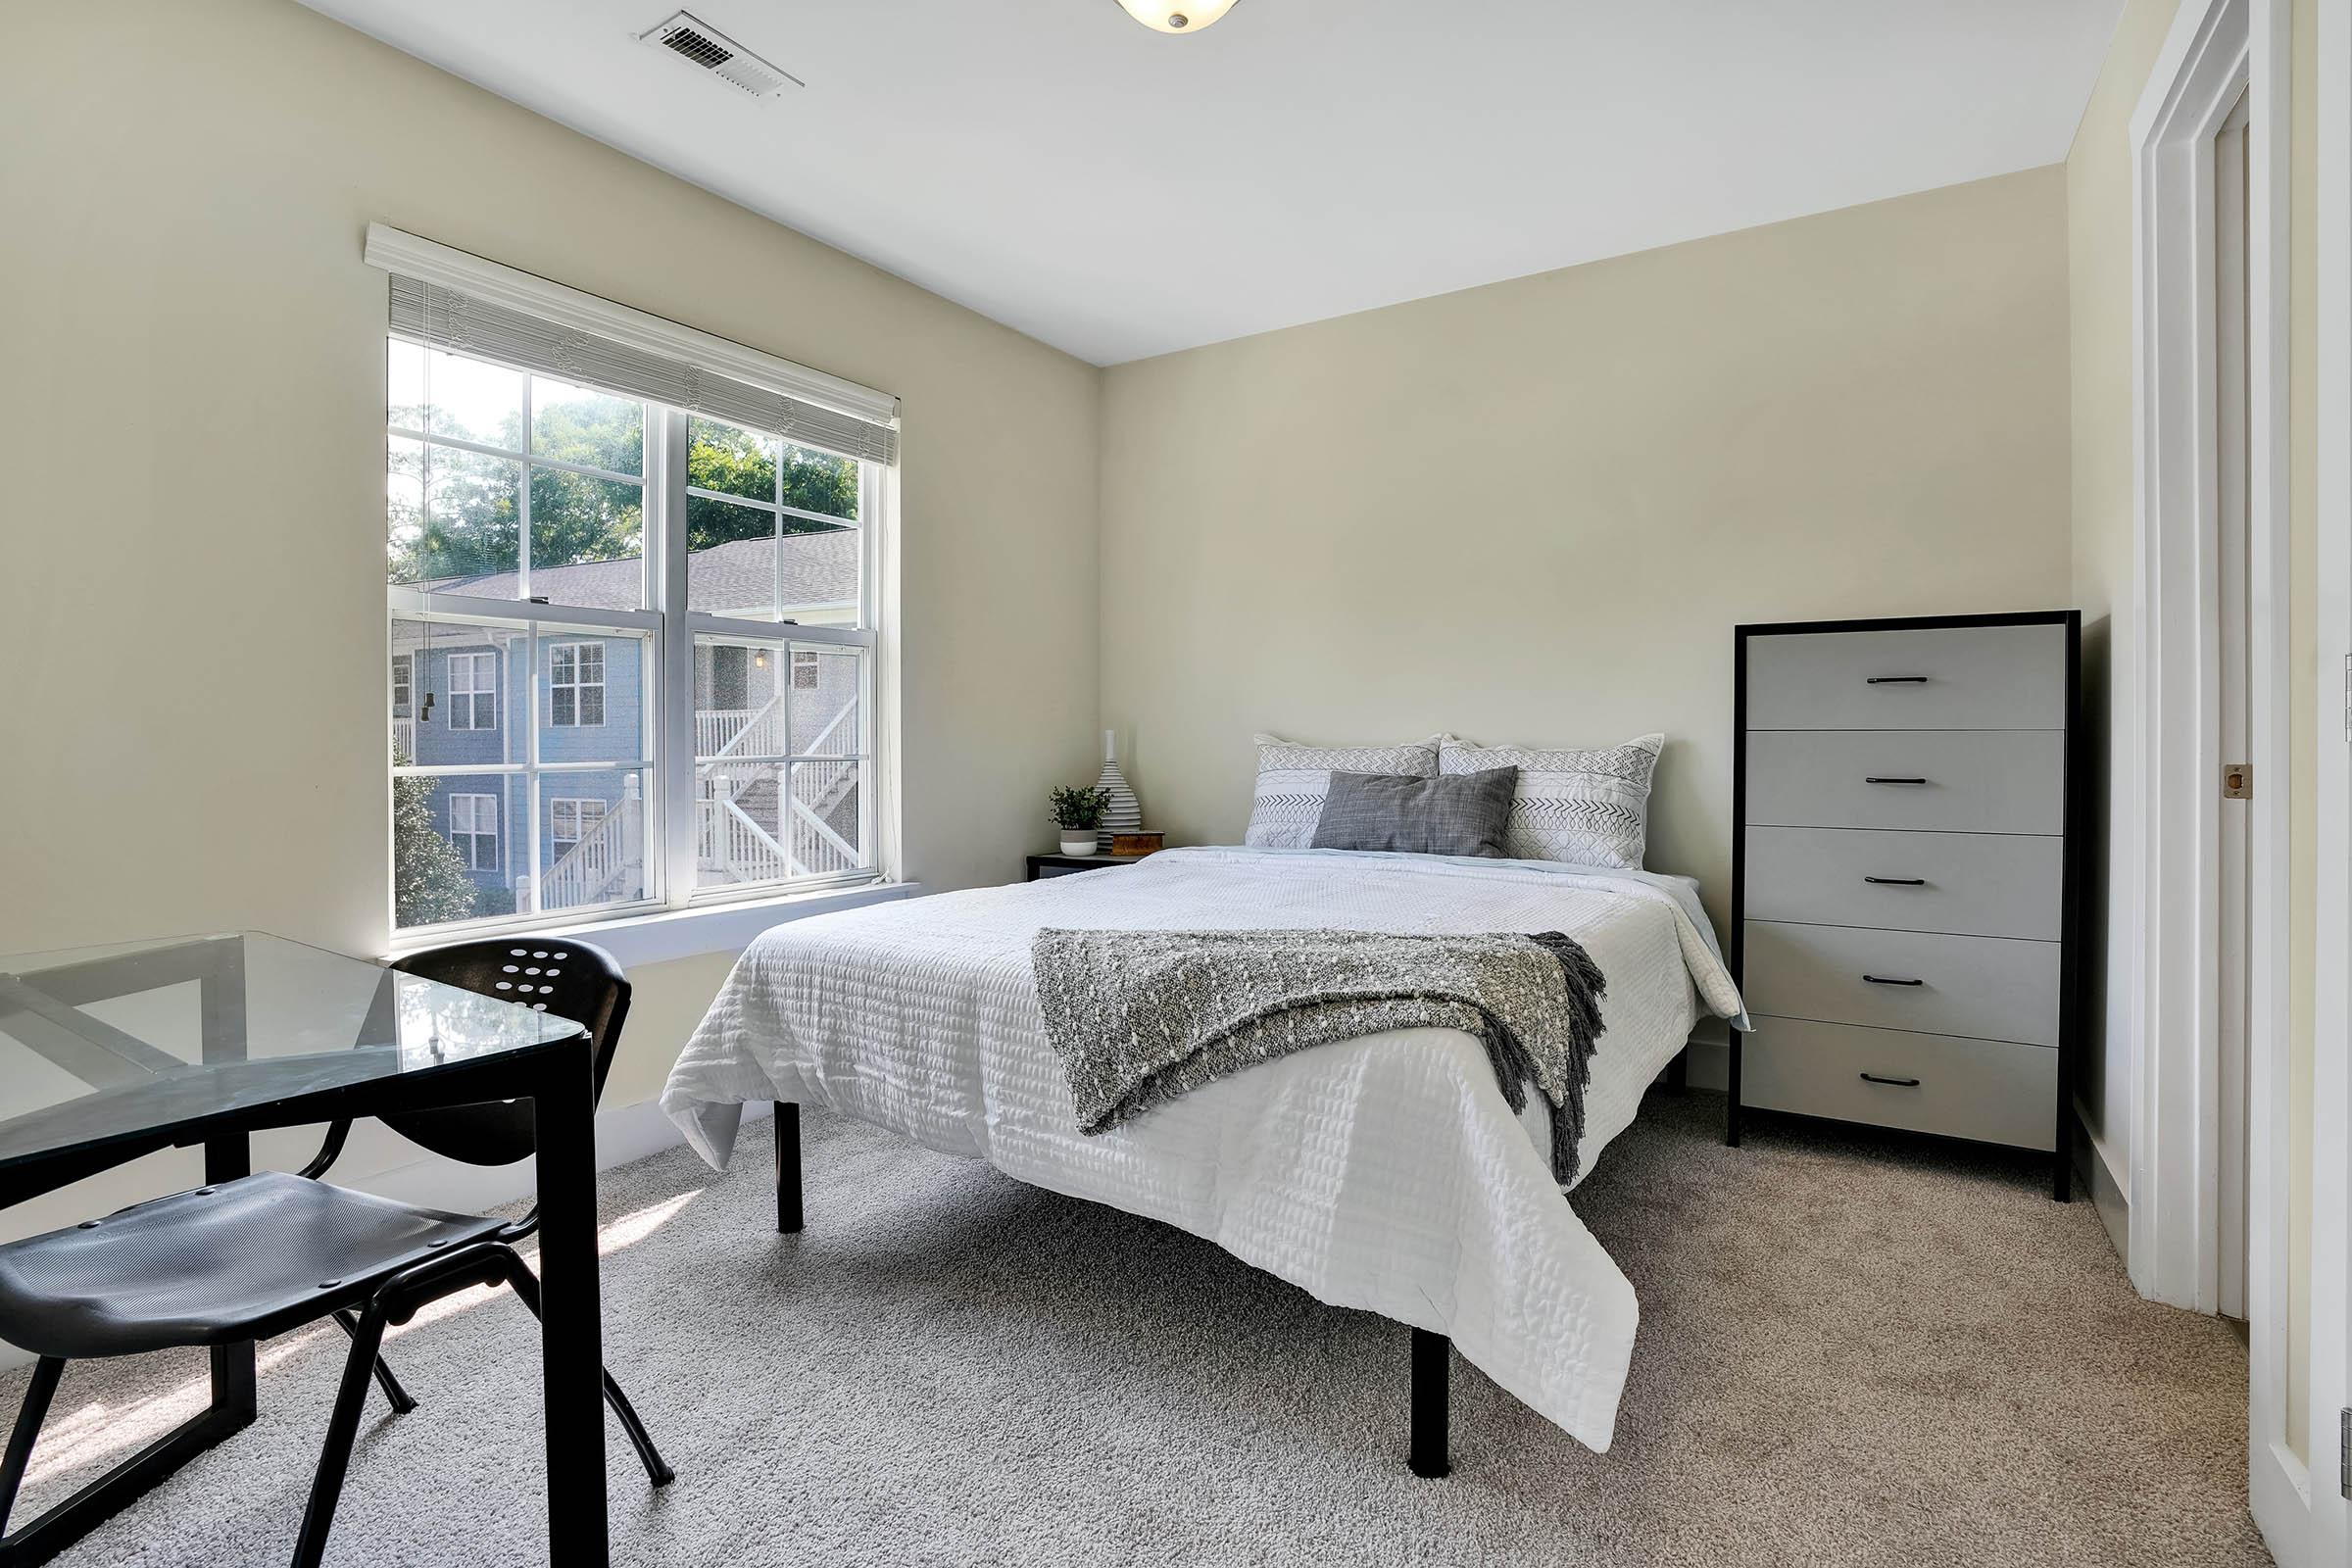 Enjoy Rooms With Natural Lighting At Elevation In Wilmington, NC